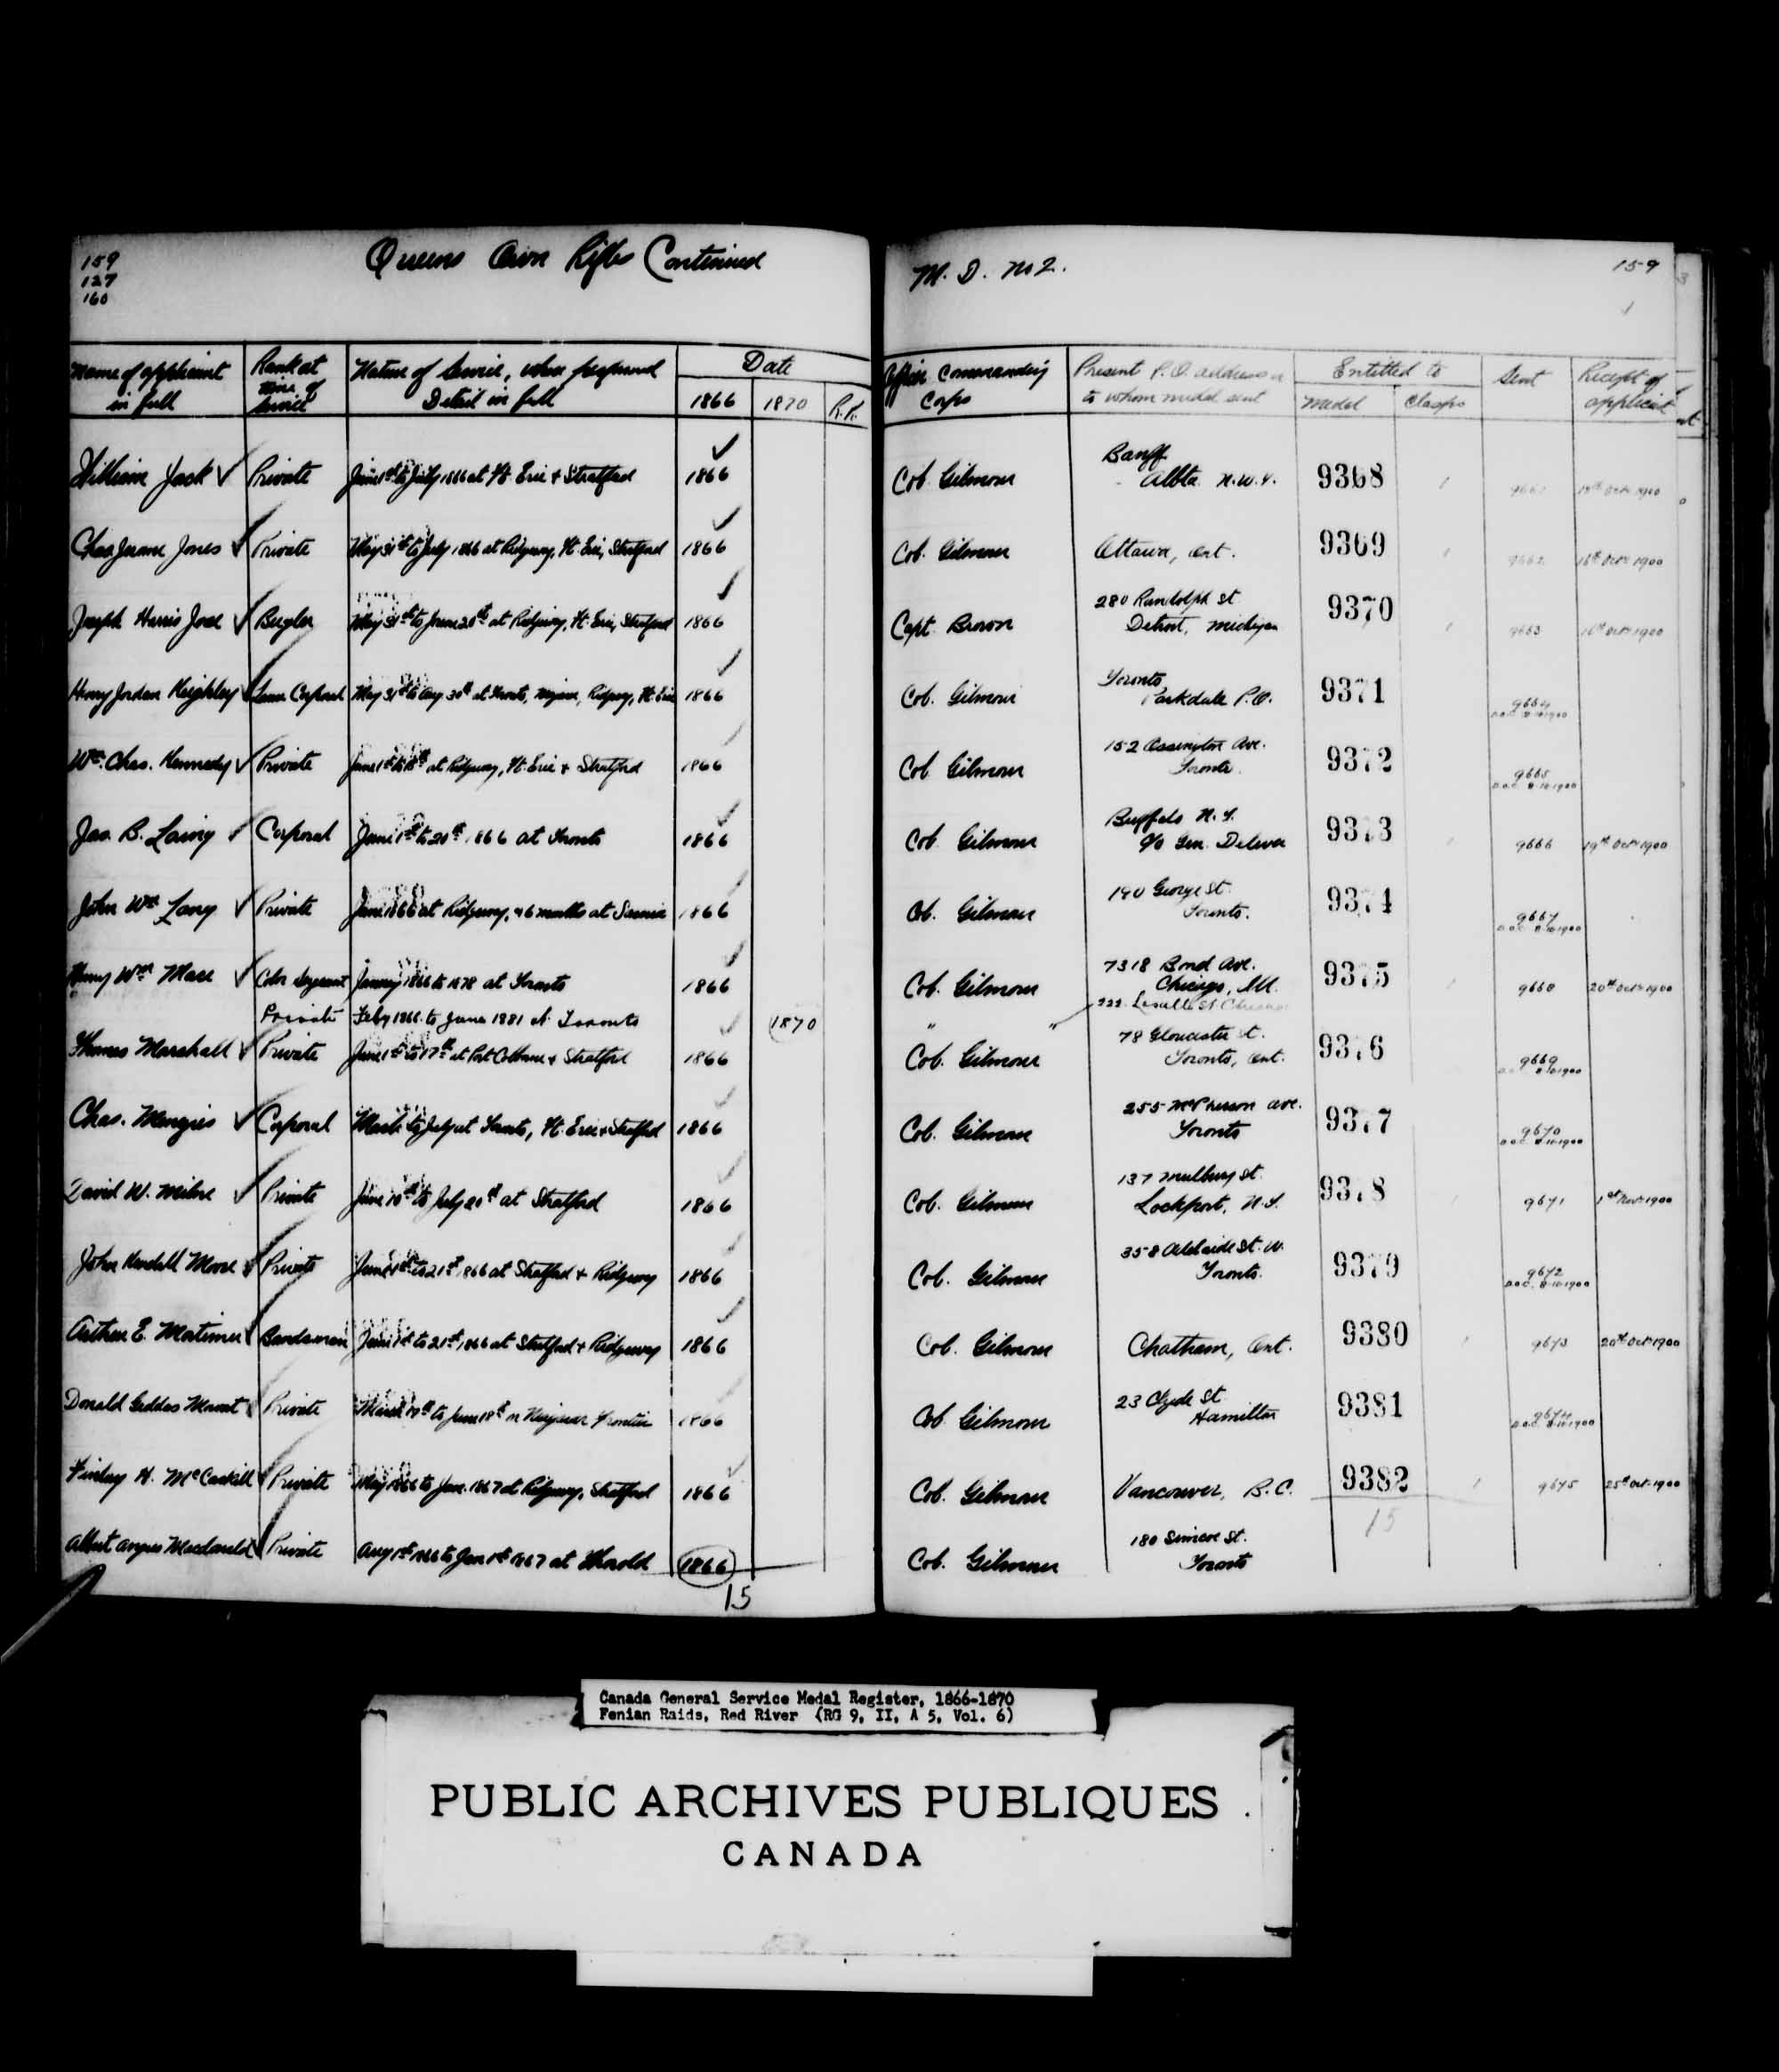 Digitized page of Medals, Honours and Awards for Image No.: e008682512